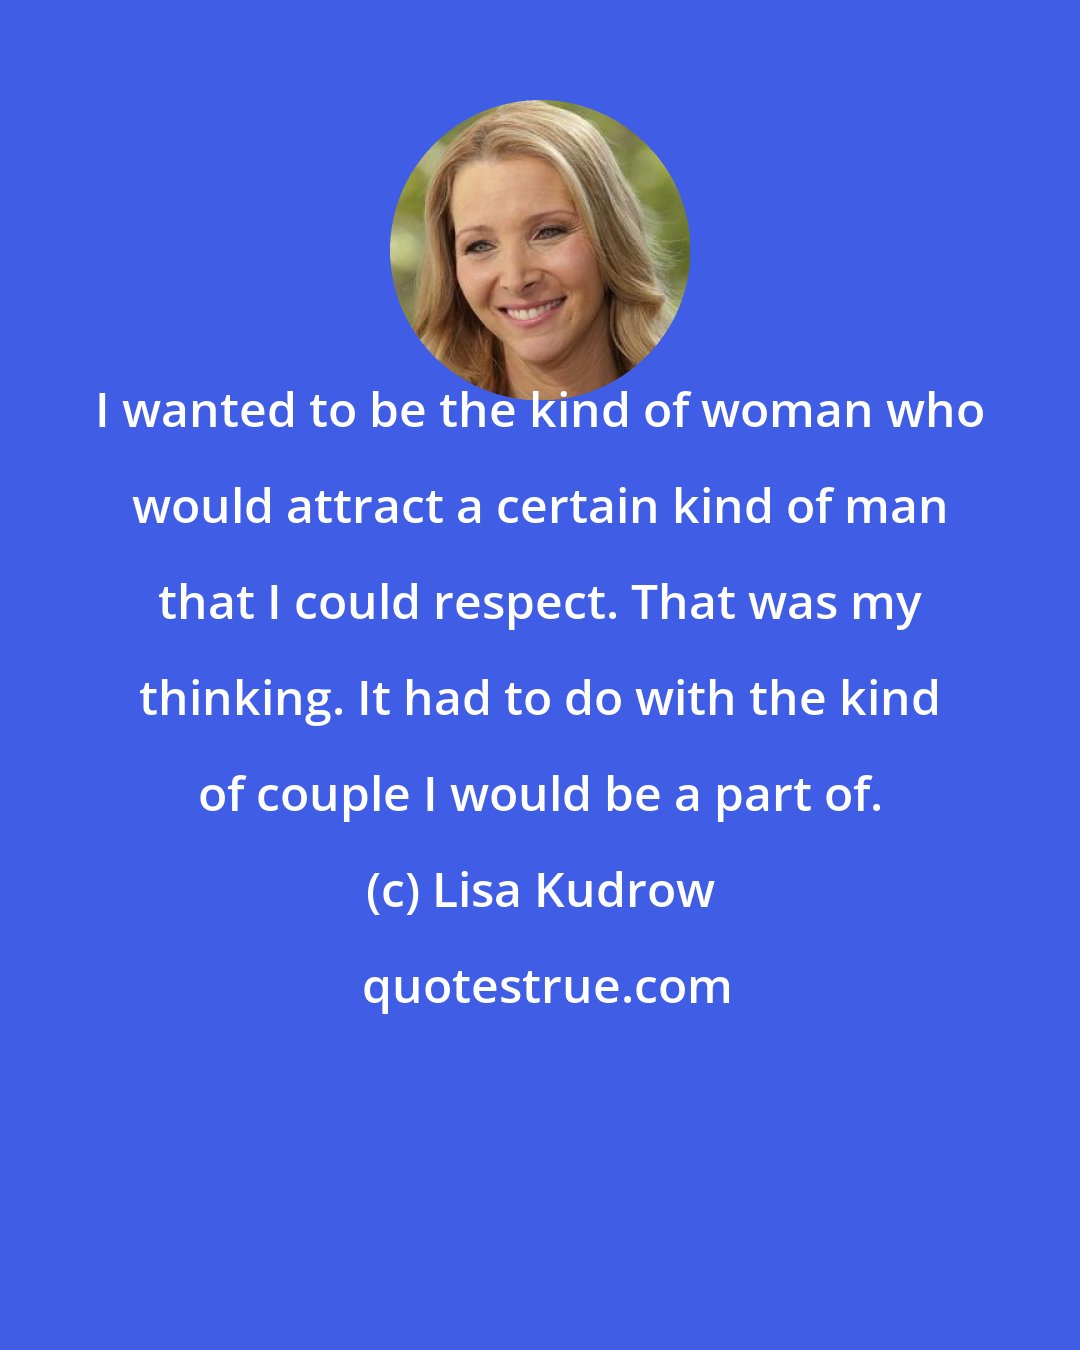 Lisa Kudrow: I wanted to be the kind of woman who would attract a certain kind of man that I could respect. That was my thinking. It had to do with the kind of couple I would be a part of.